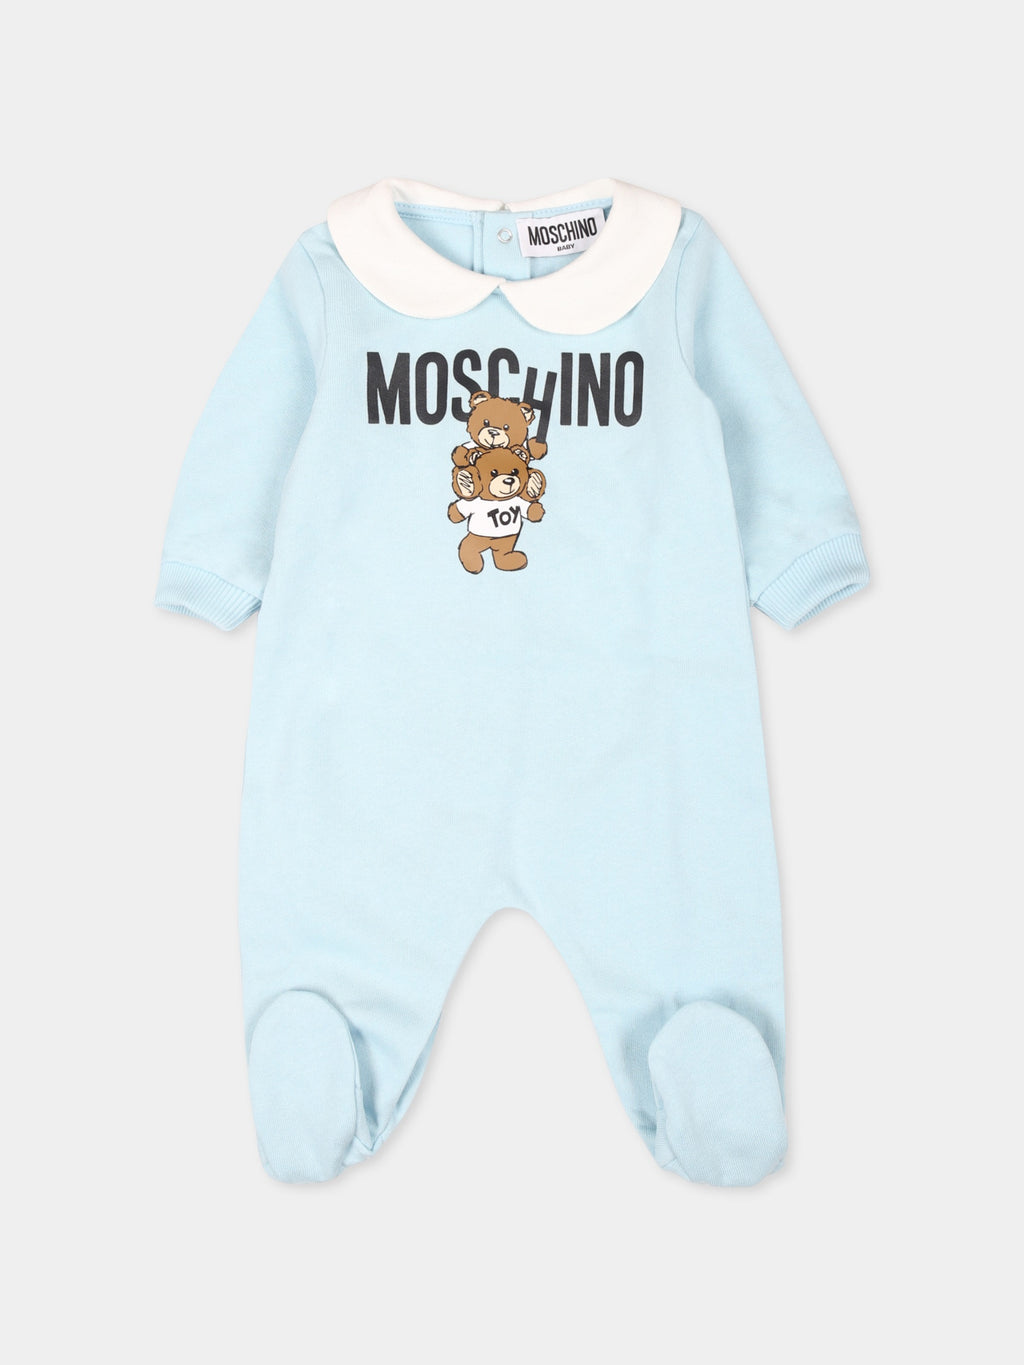 Light blue babygrow for baby boy with two Teddy Bears